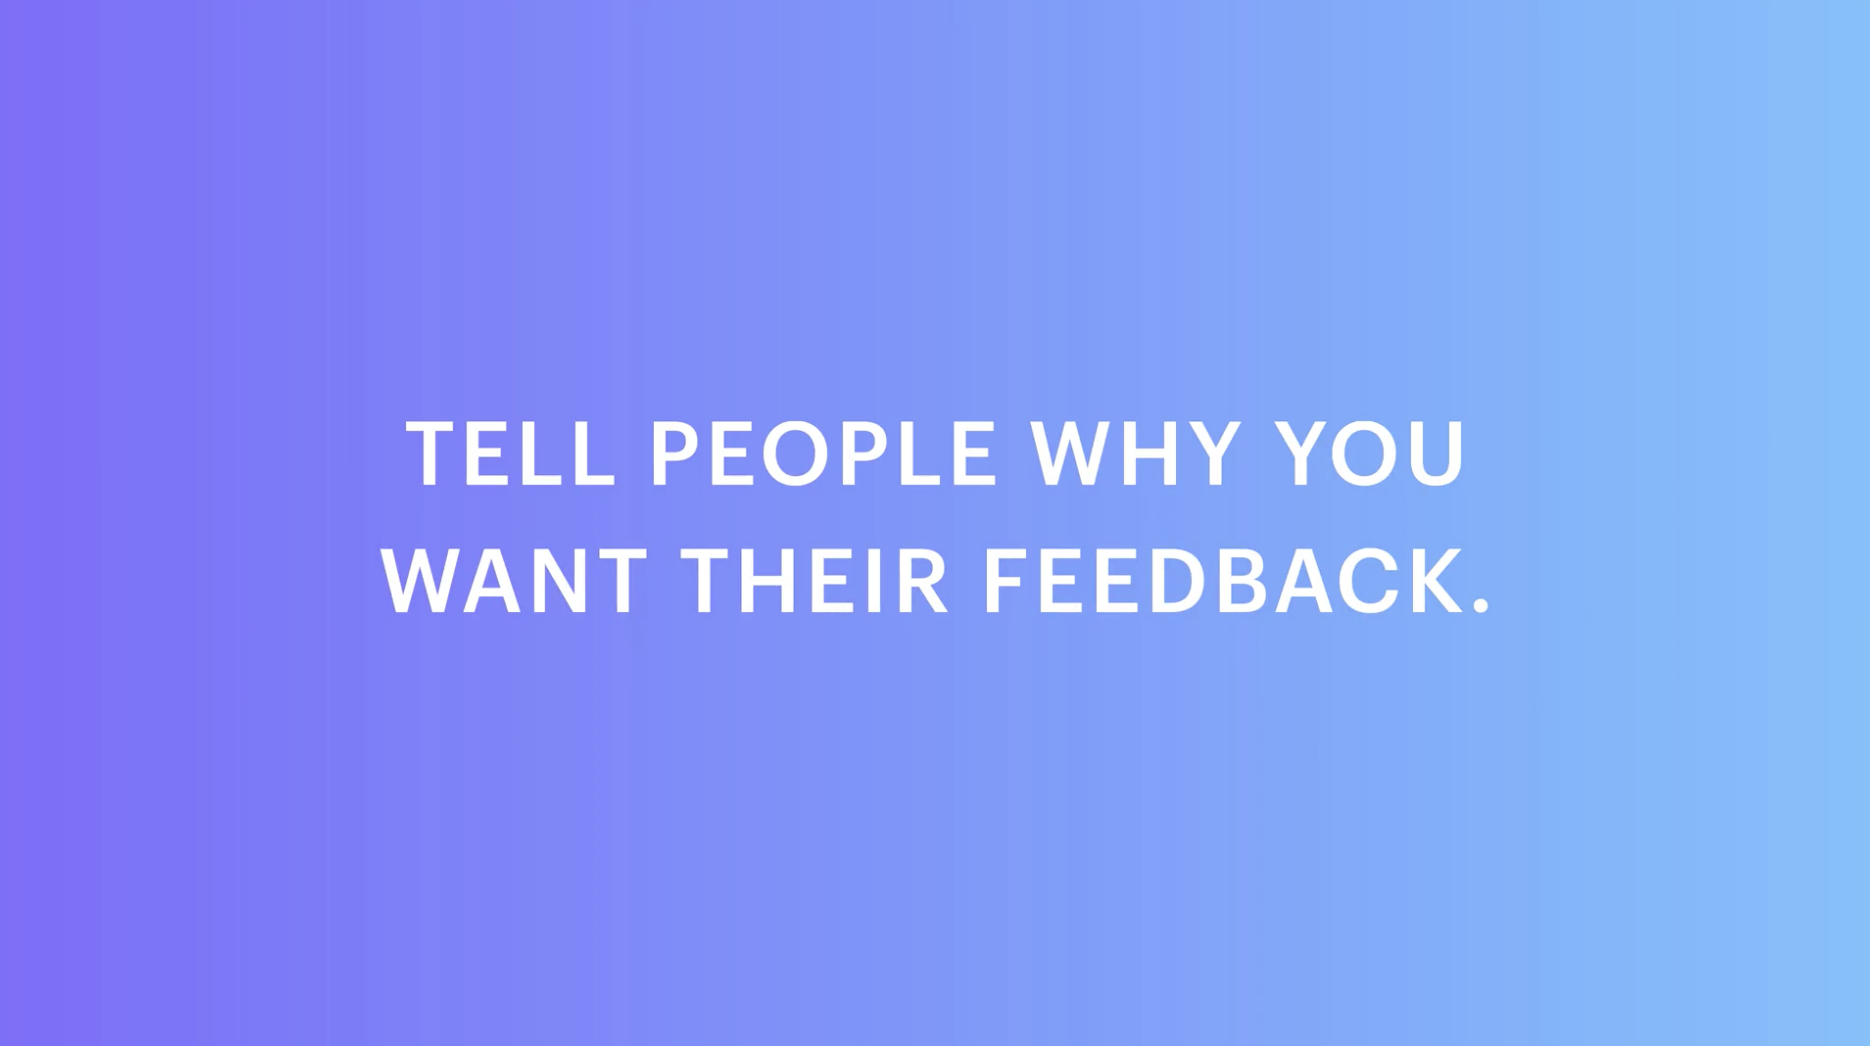 This graphic explains one of the key parts of asking for feedback from clients: tell people why you want their feedback.